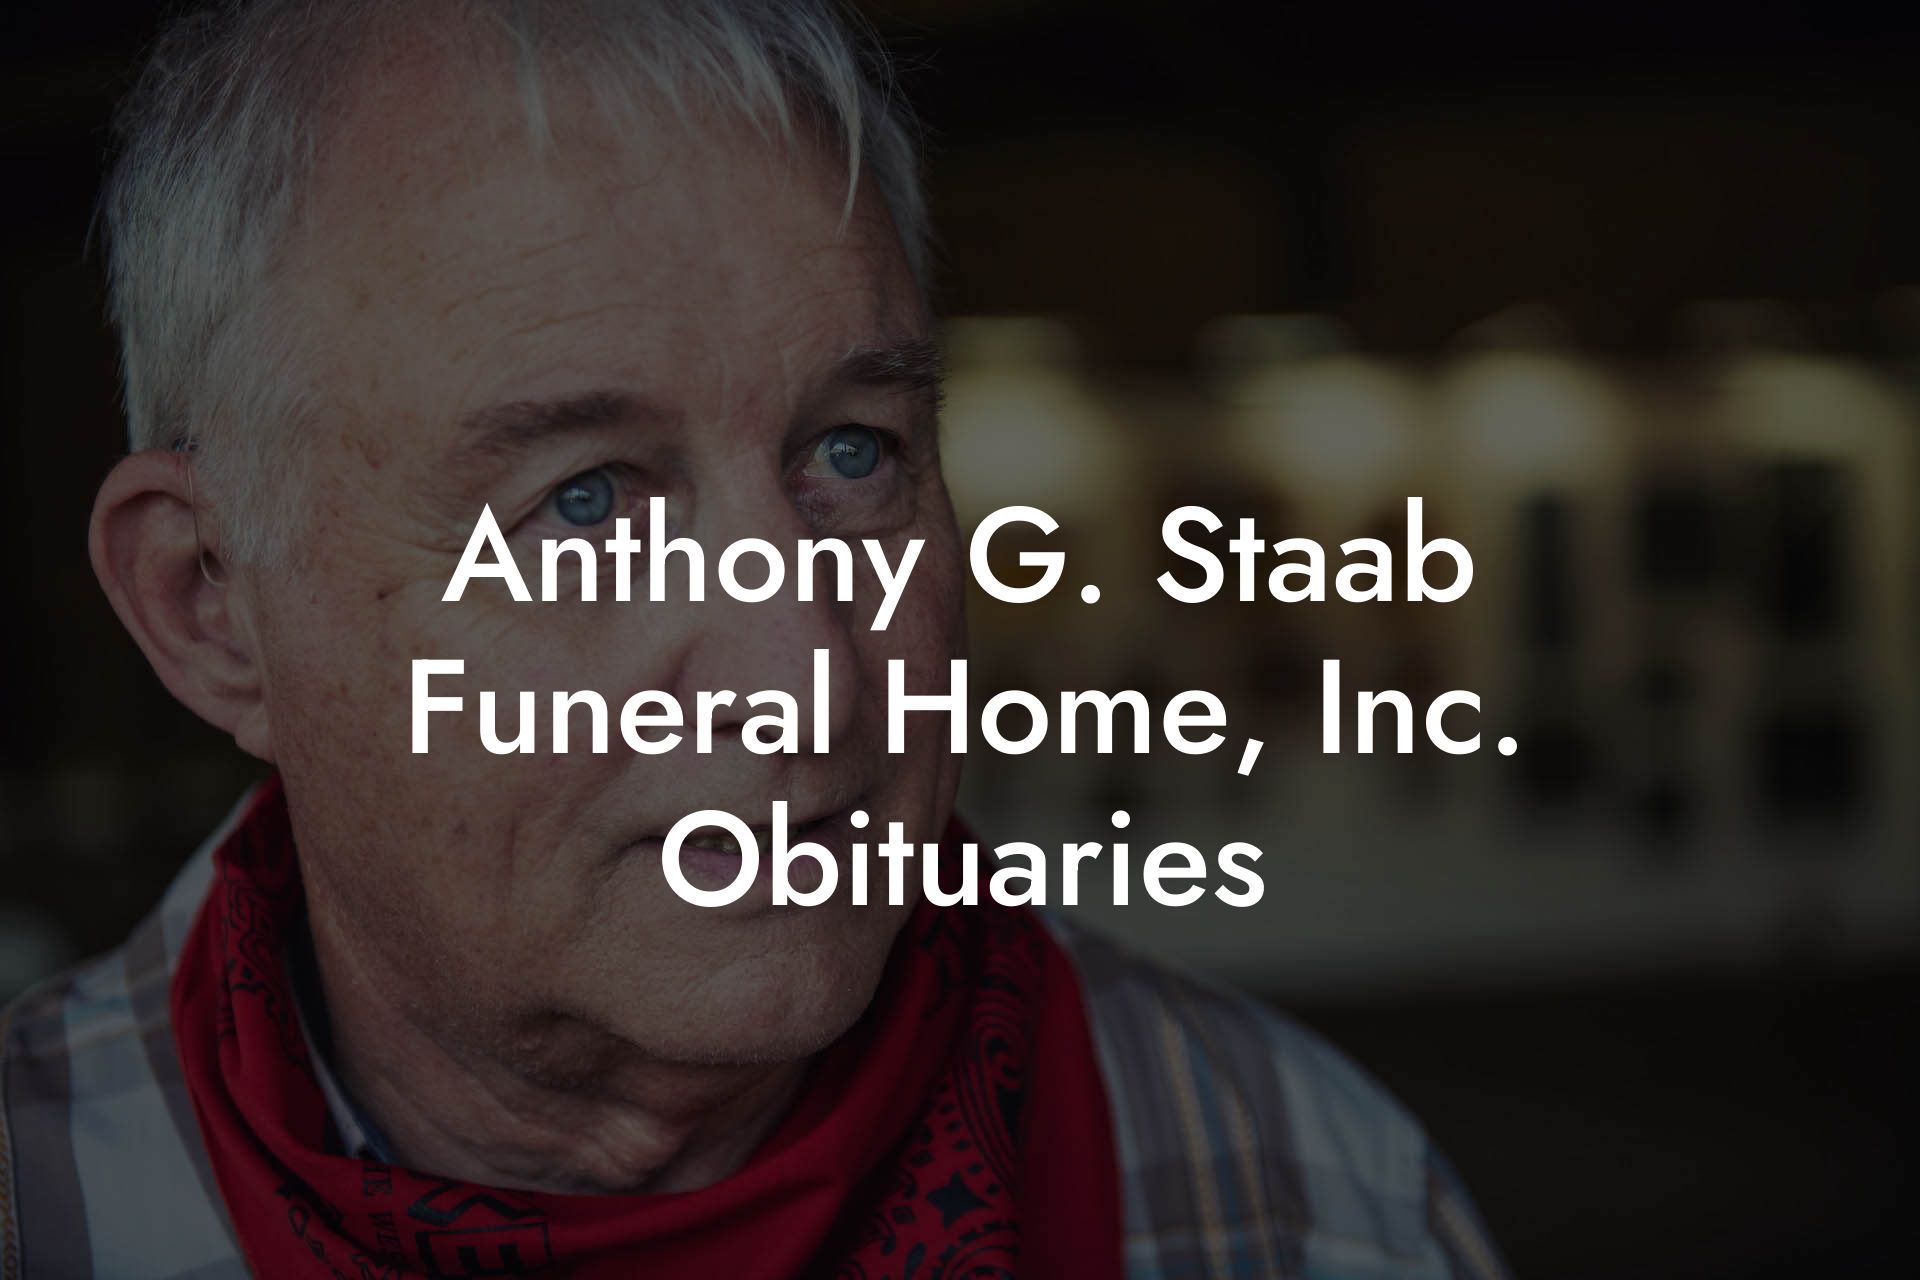 Anthony G. Staab Funeral Home, Inc. Obituaries